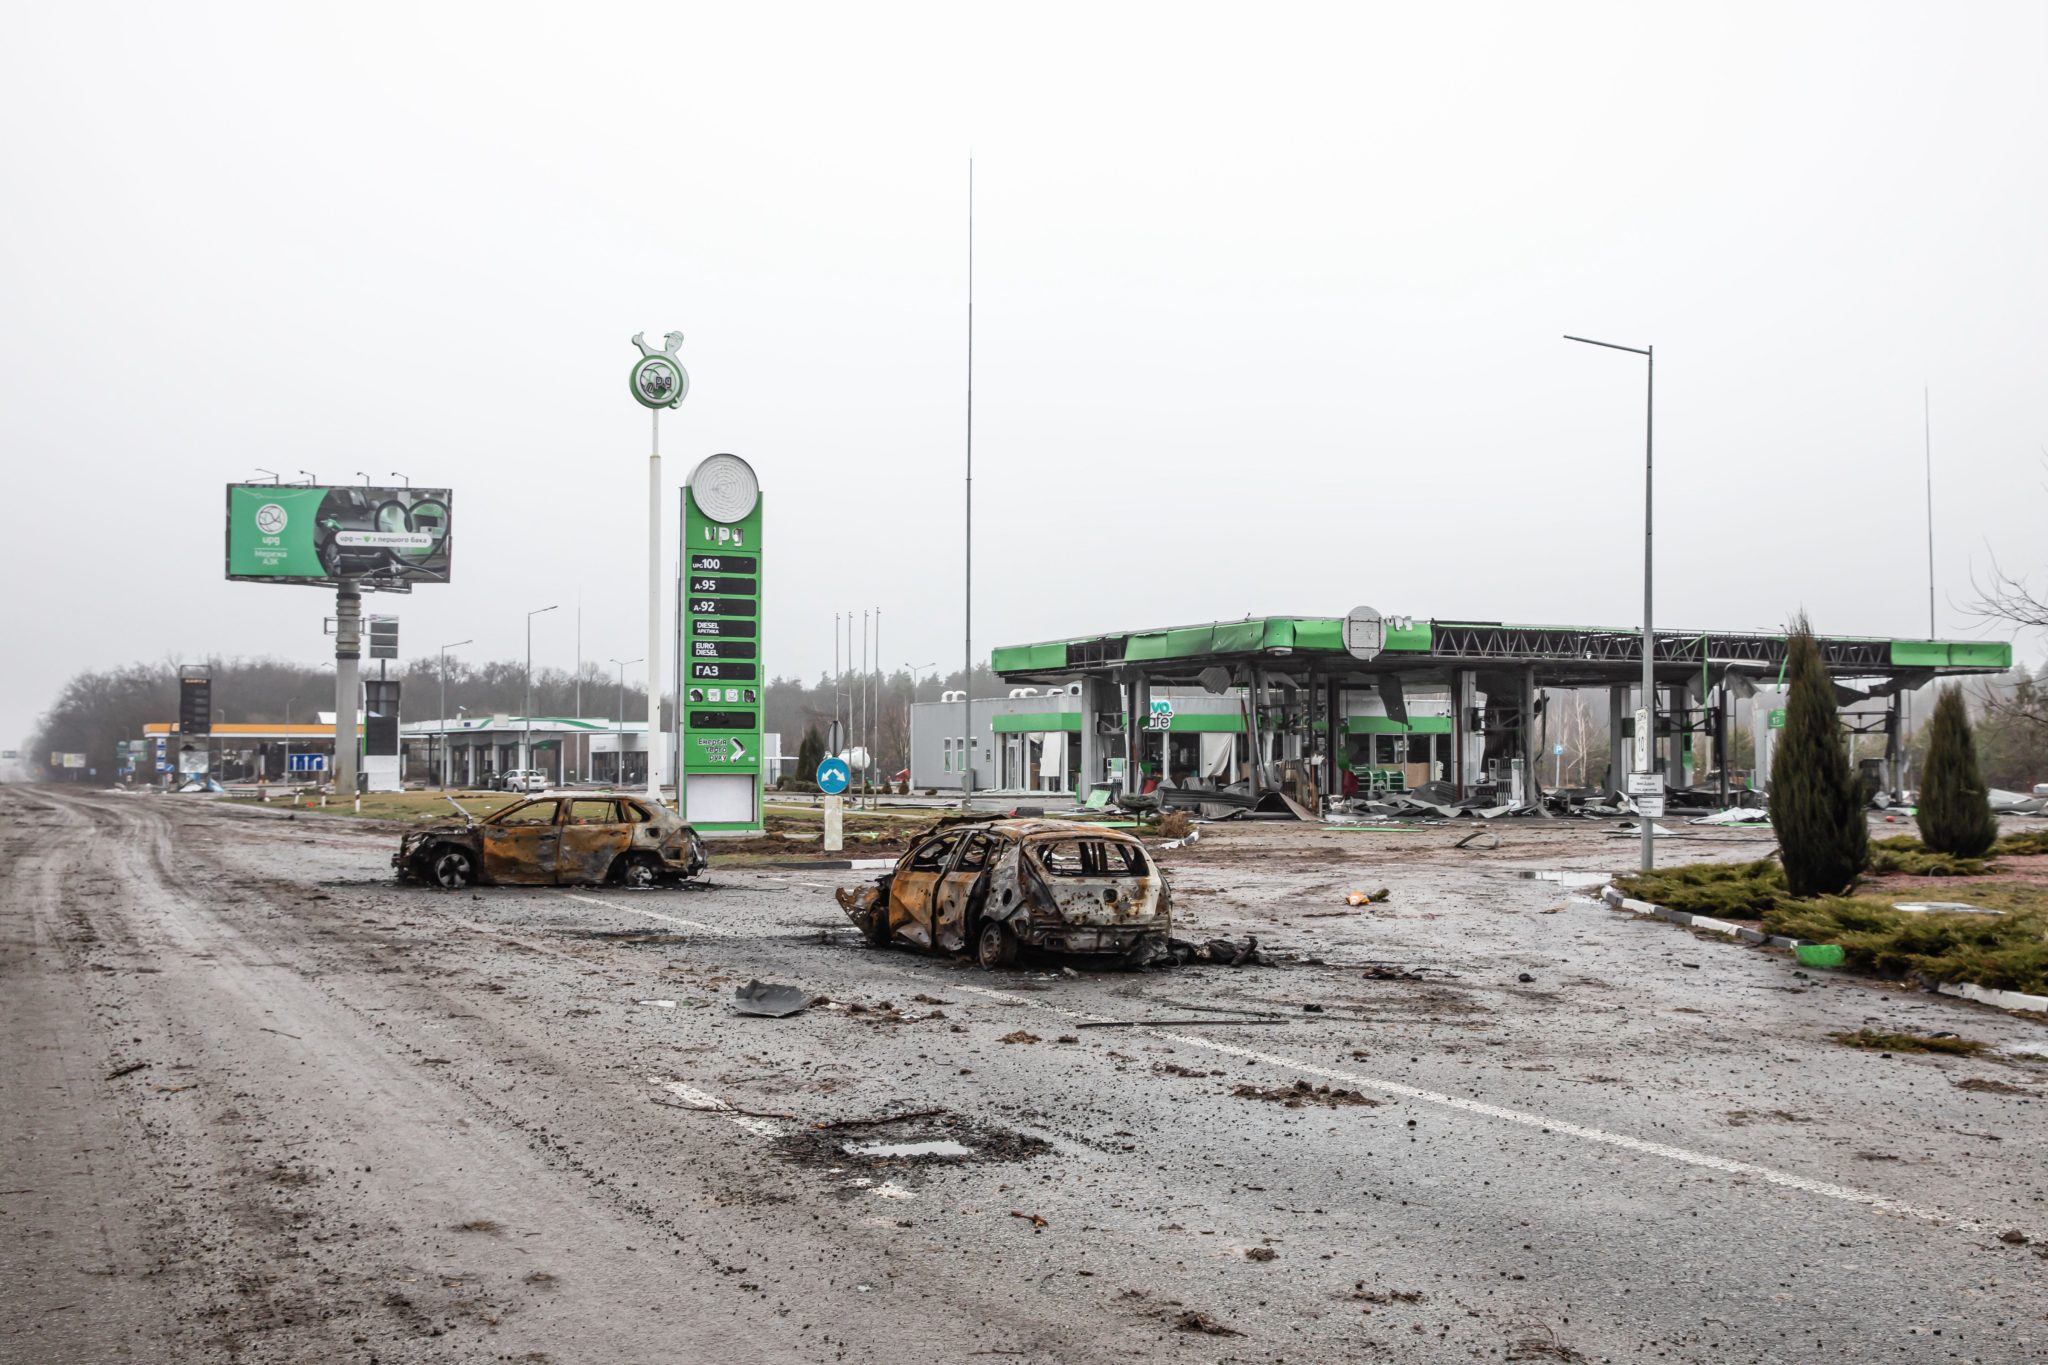 Destroyed cars at a petrol station on the highway 20km from Kyiv, 02-04-2022. Image: ZUMA Press Inc / Alamy Stock Photo 